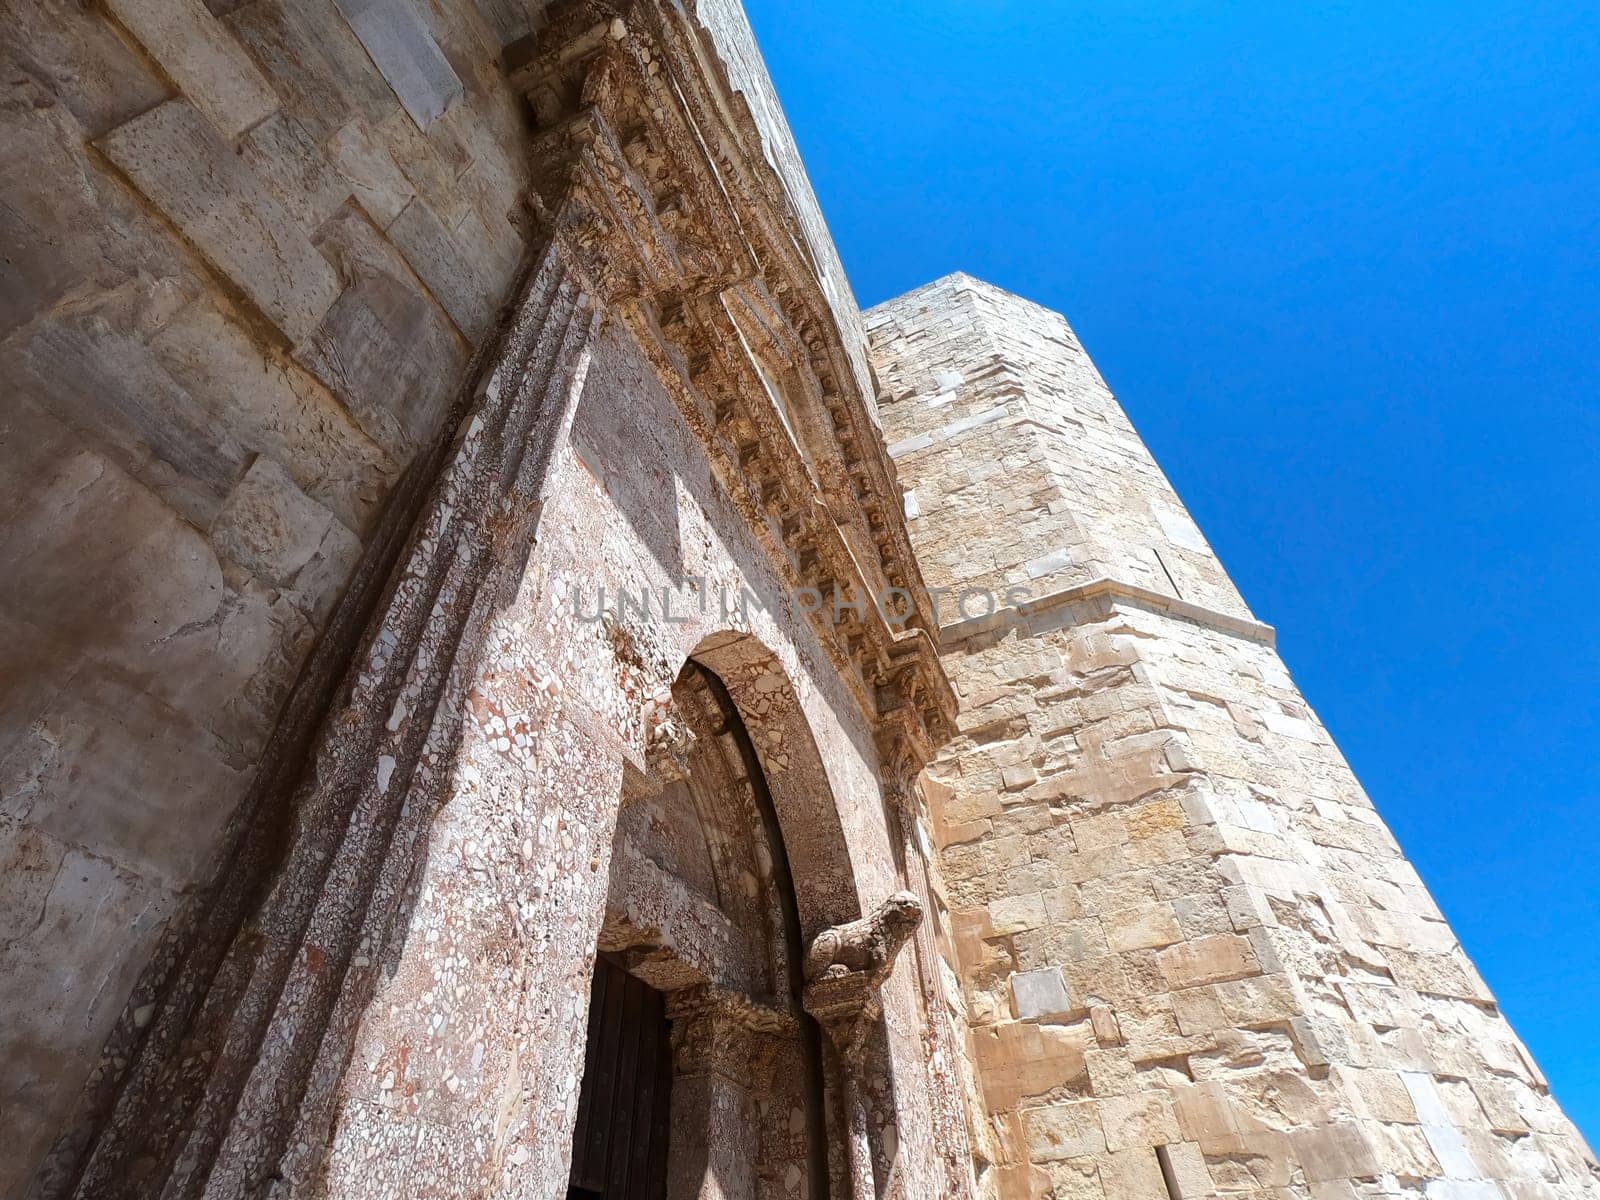 Andria, Puglia, Castel del Monte. Castel del Monte is a thirteenth century fortress built by the Emperor of the Holy Roman Empire Frederick II in the plateau of western Murge, in Puglia. by Digoarpi